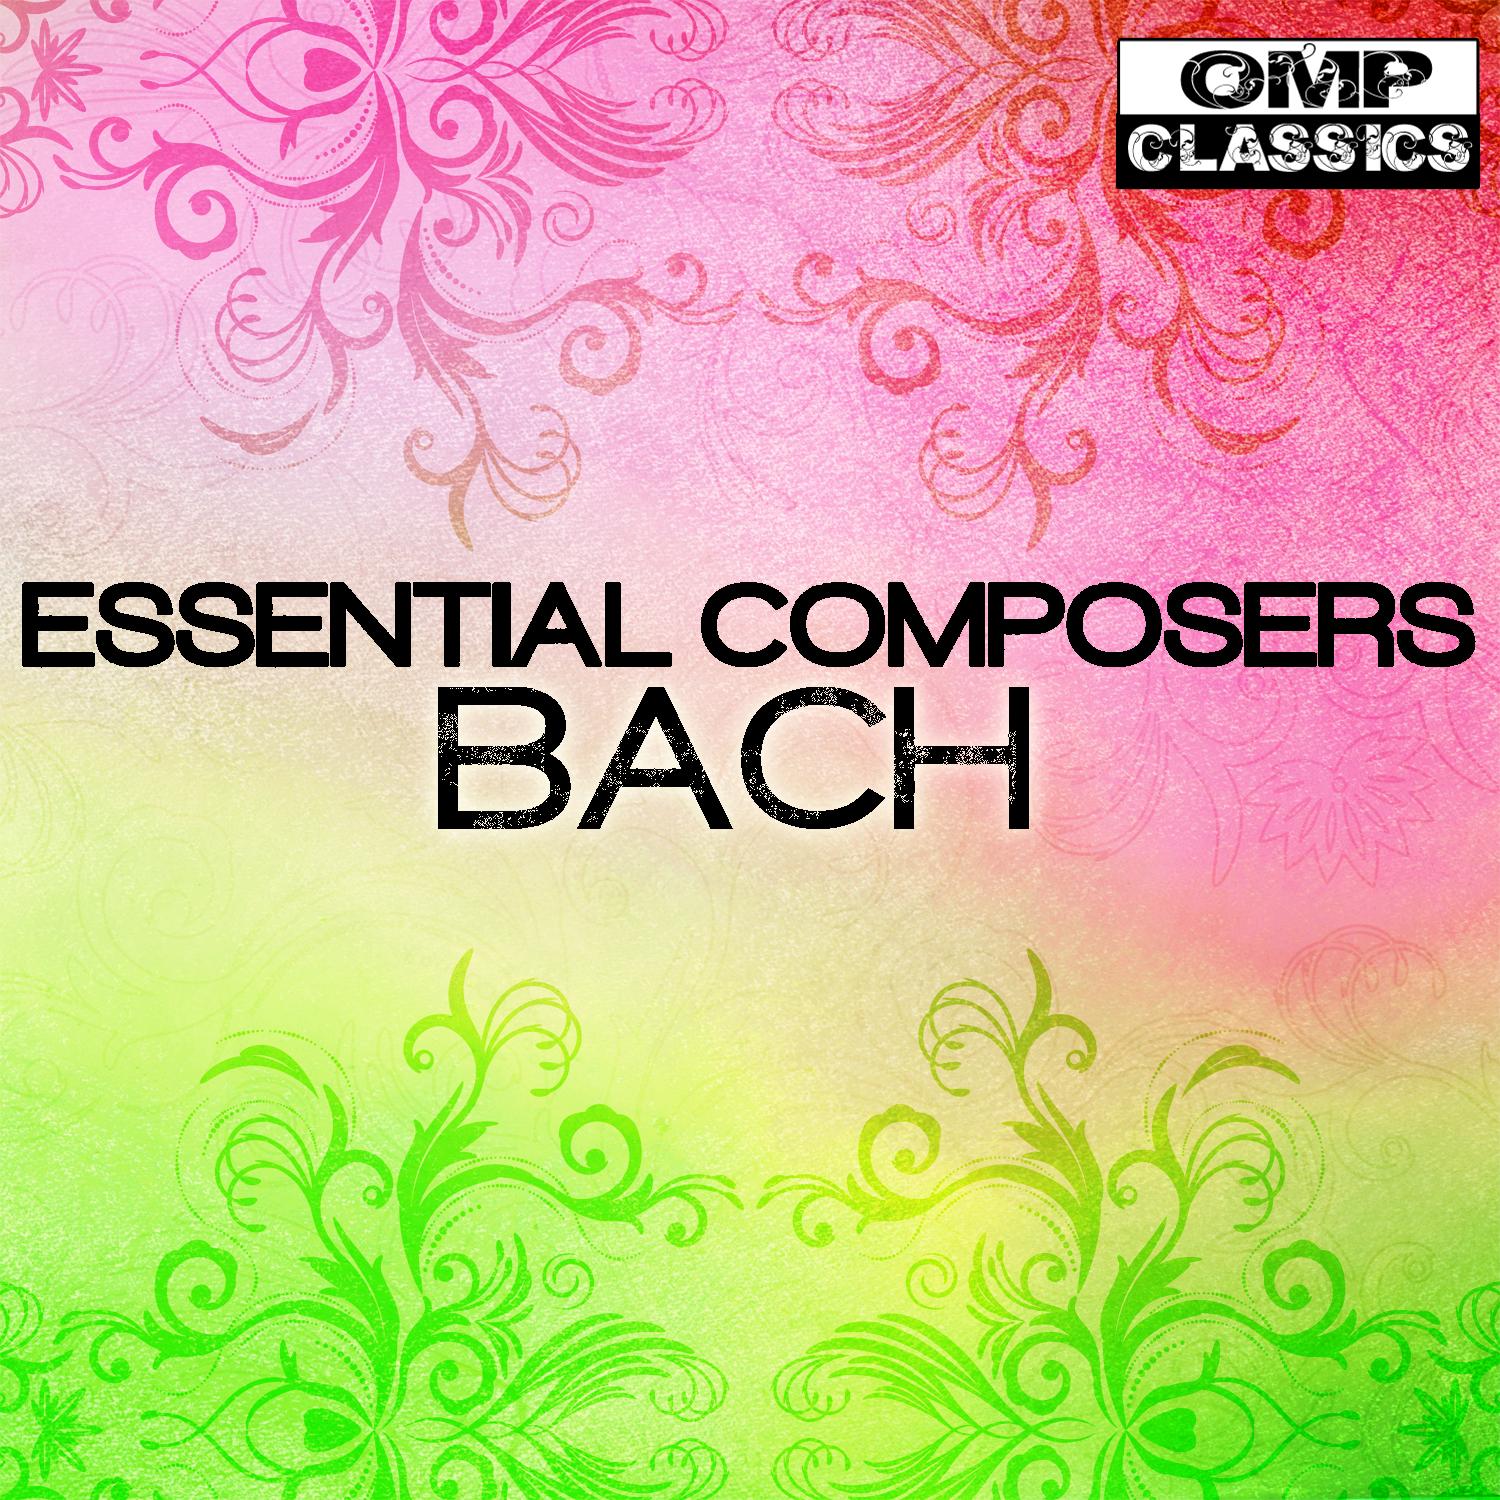 Essential Composers: Bach